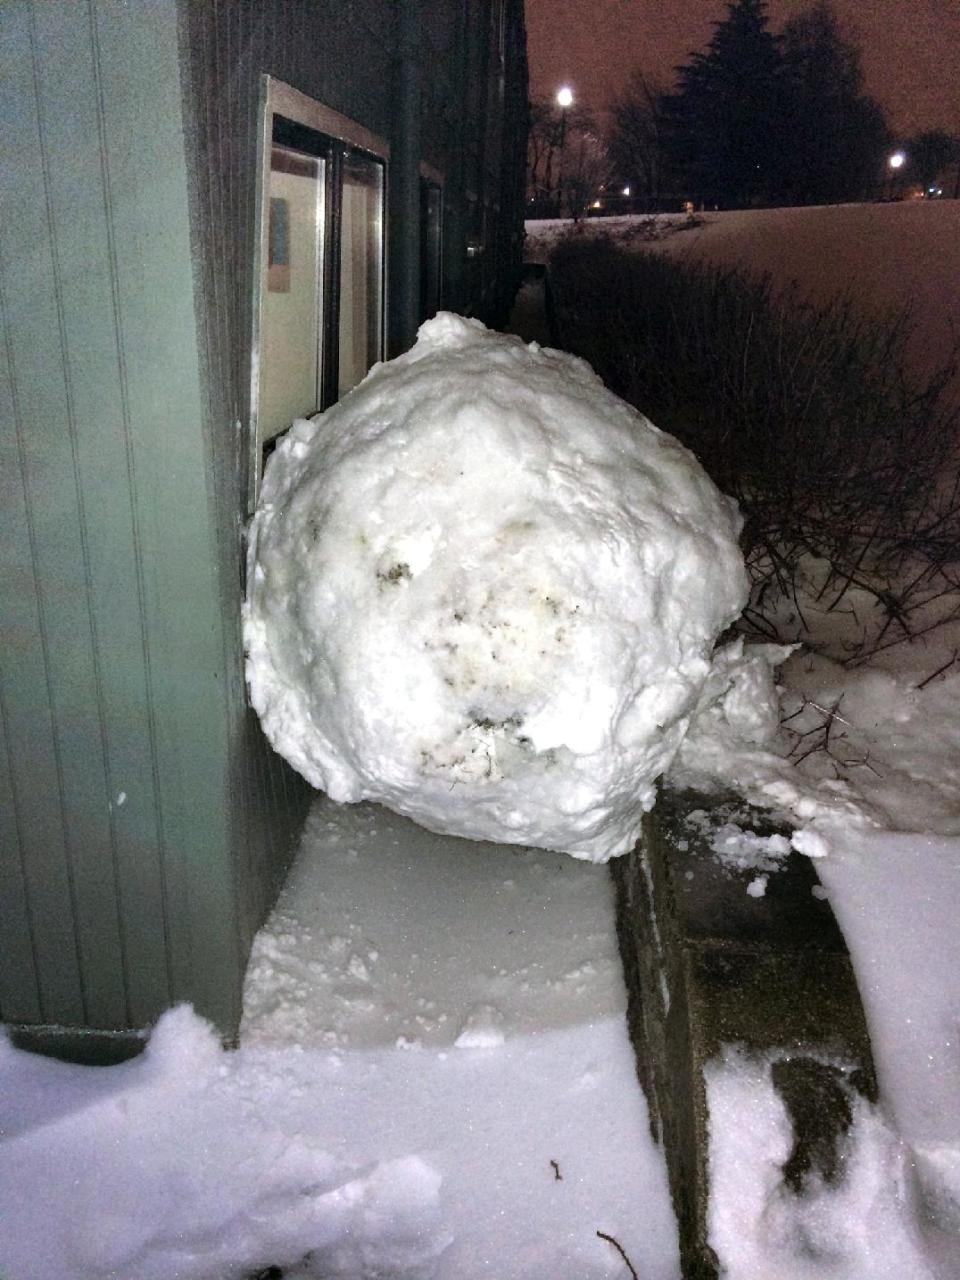 This Feb. 8, 2014 image provided by Reed College shows a large snowball that crashed into a Grove Quad dormitory at Reed College in Portland, Ore. The crash ripped a wall off its studs and narrowly missed a window. No one was injured in the collision. College officials say the ball was some 40 inches in diameter and weighed from 800 to 900 pounds.(AP Photo/Reed Magazine)